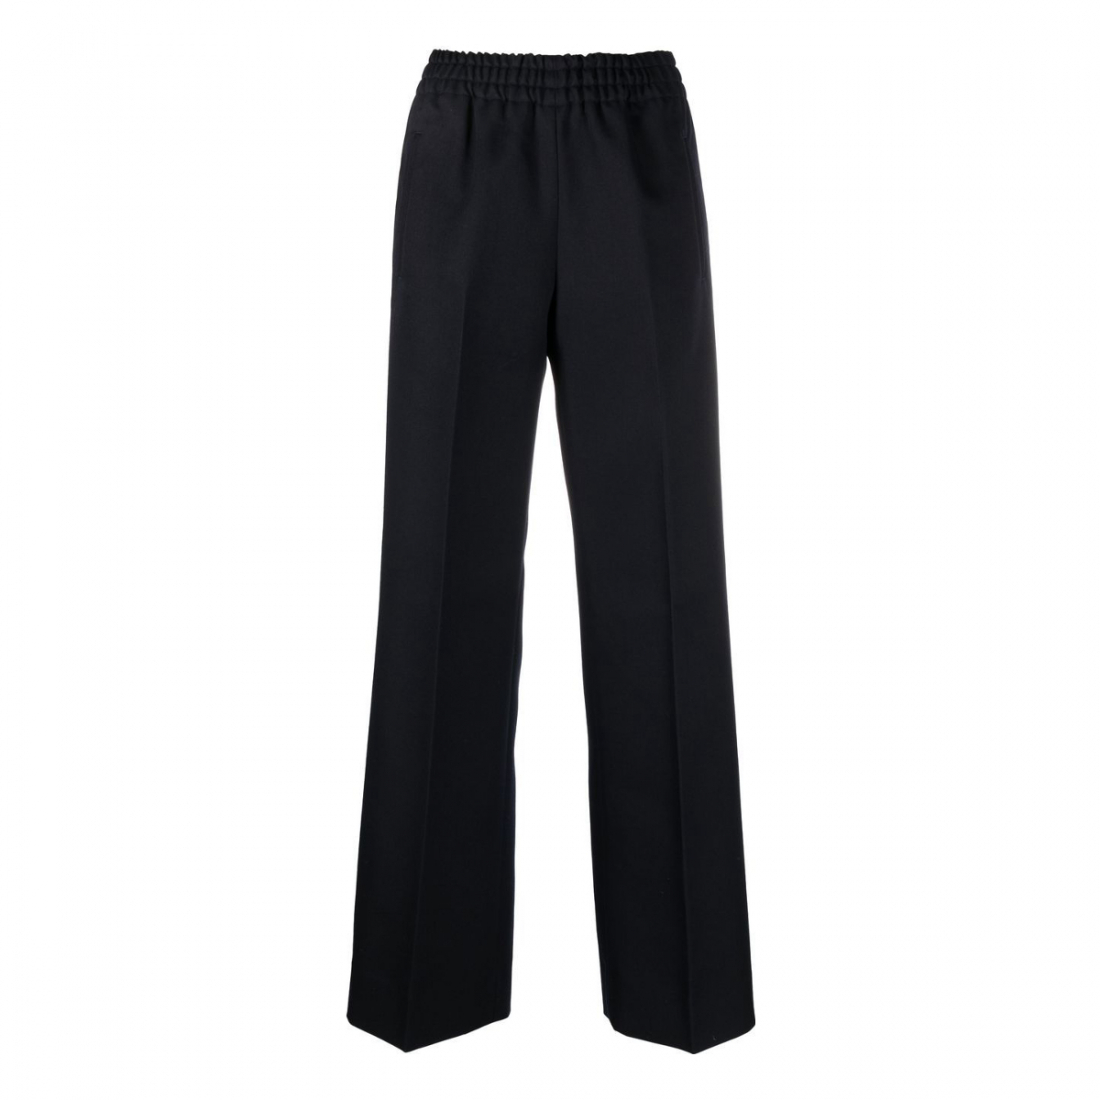 Women's 'Brittany' Trousers